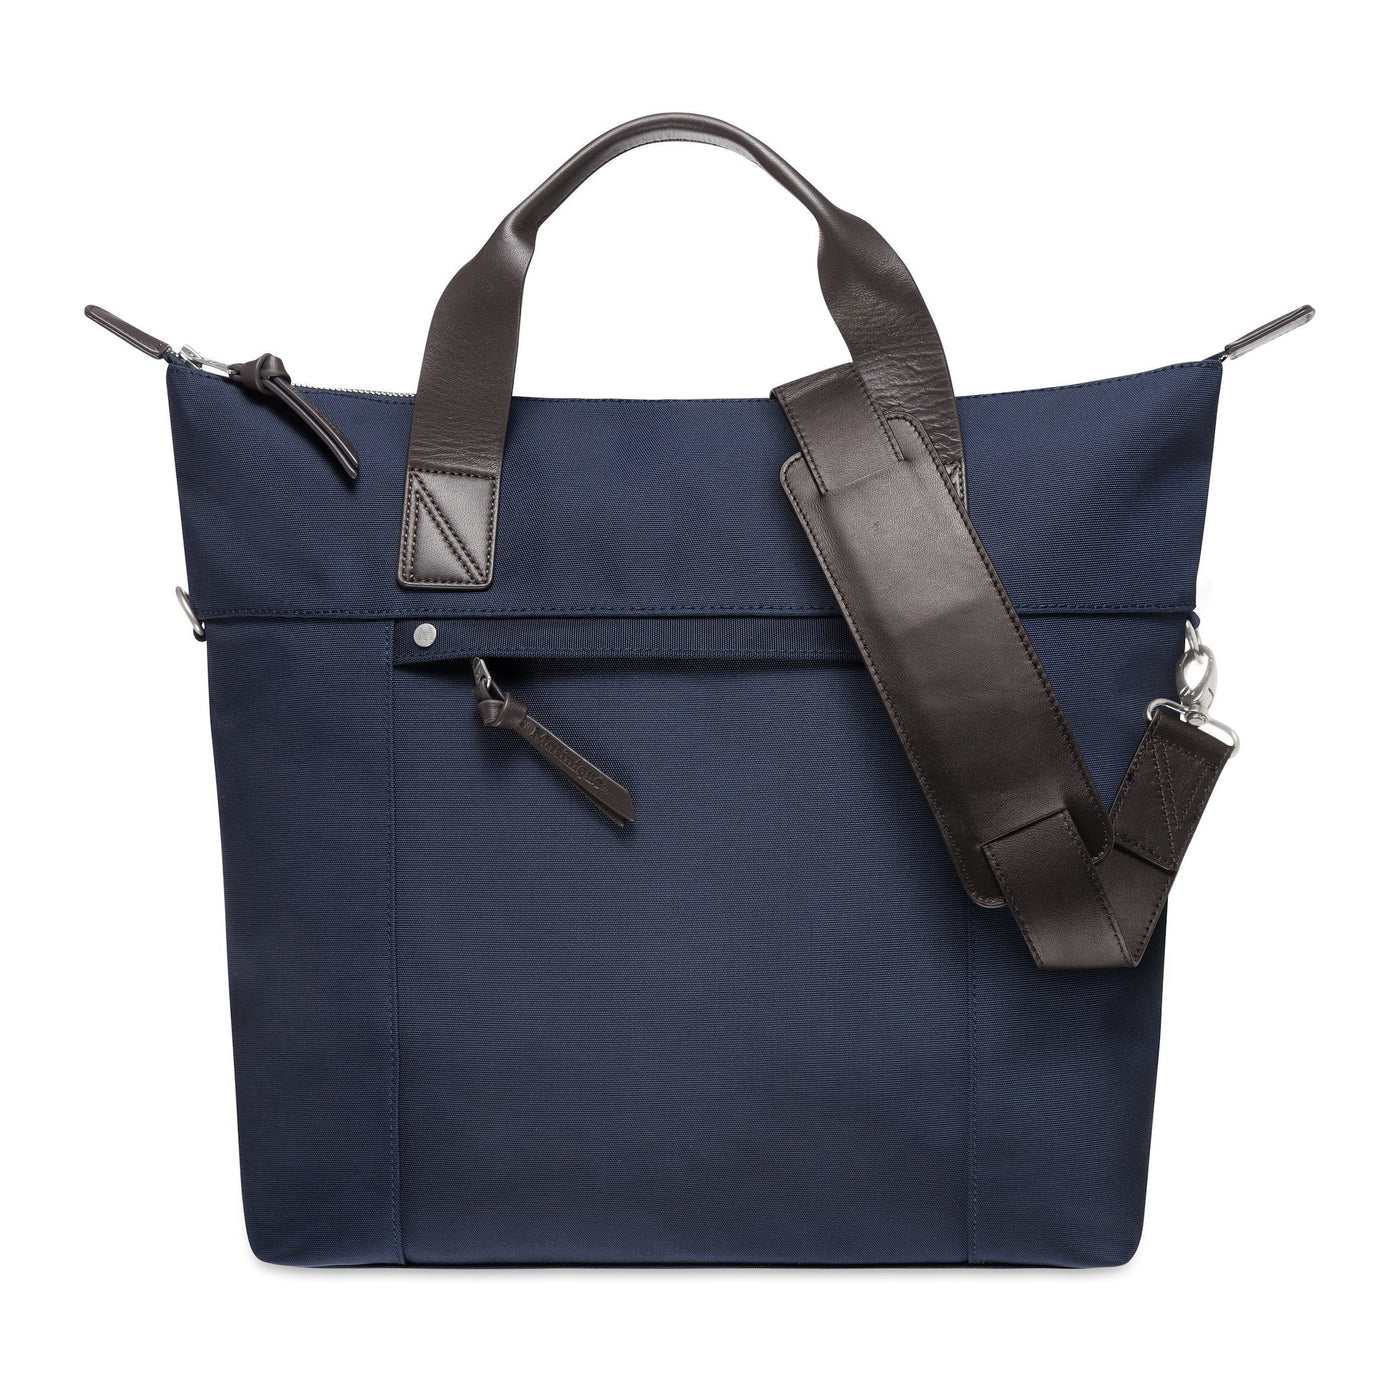 Gotstyle Fashion - Matinique Bags Nylon Tote Bag with Shoulder Strap - Dark Navy